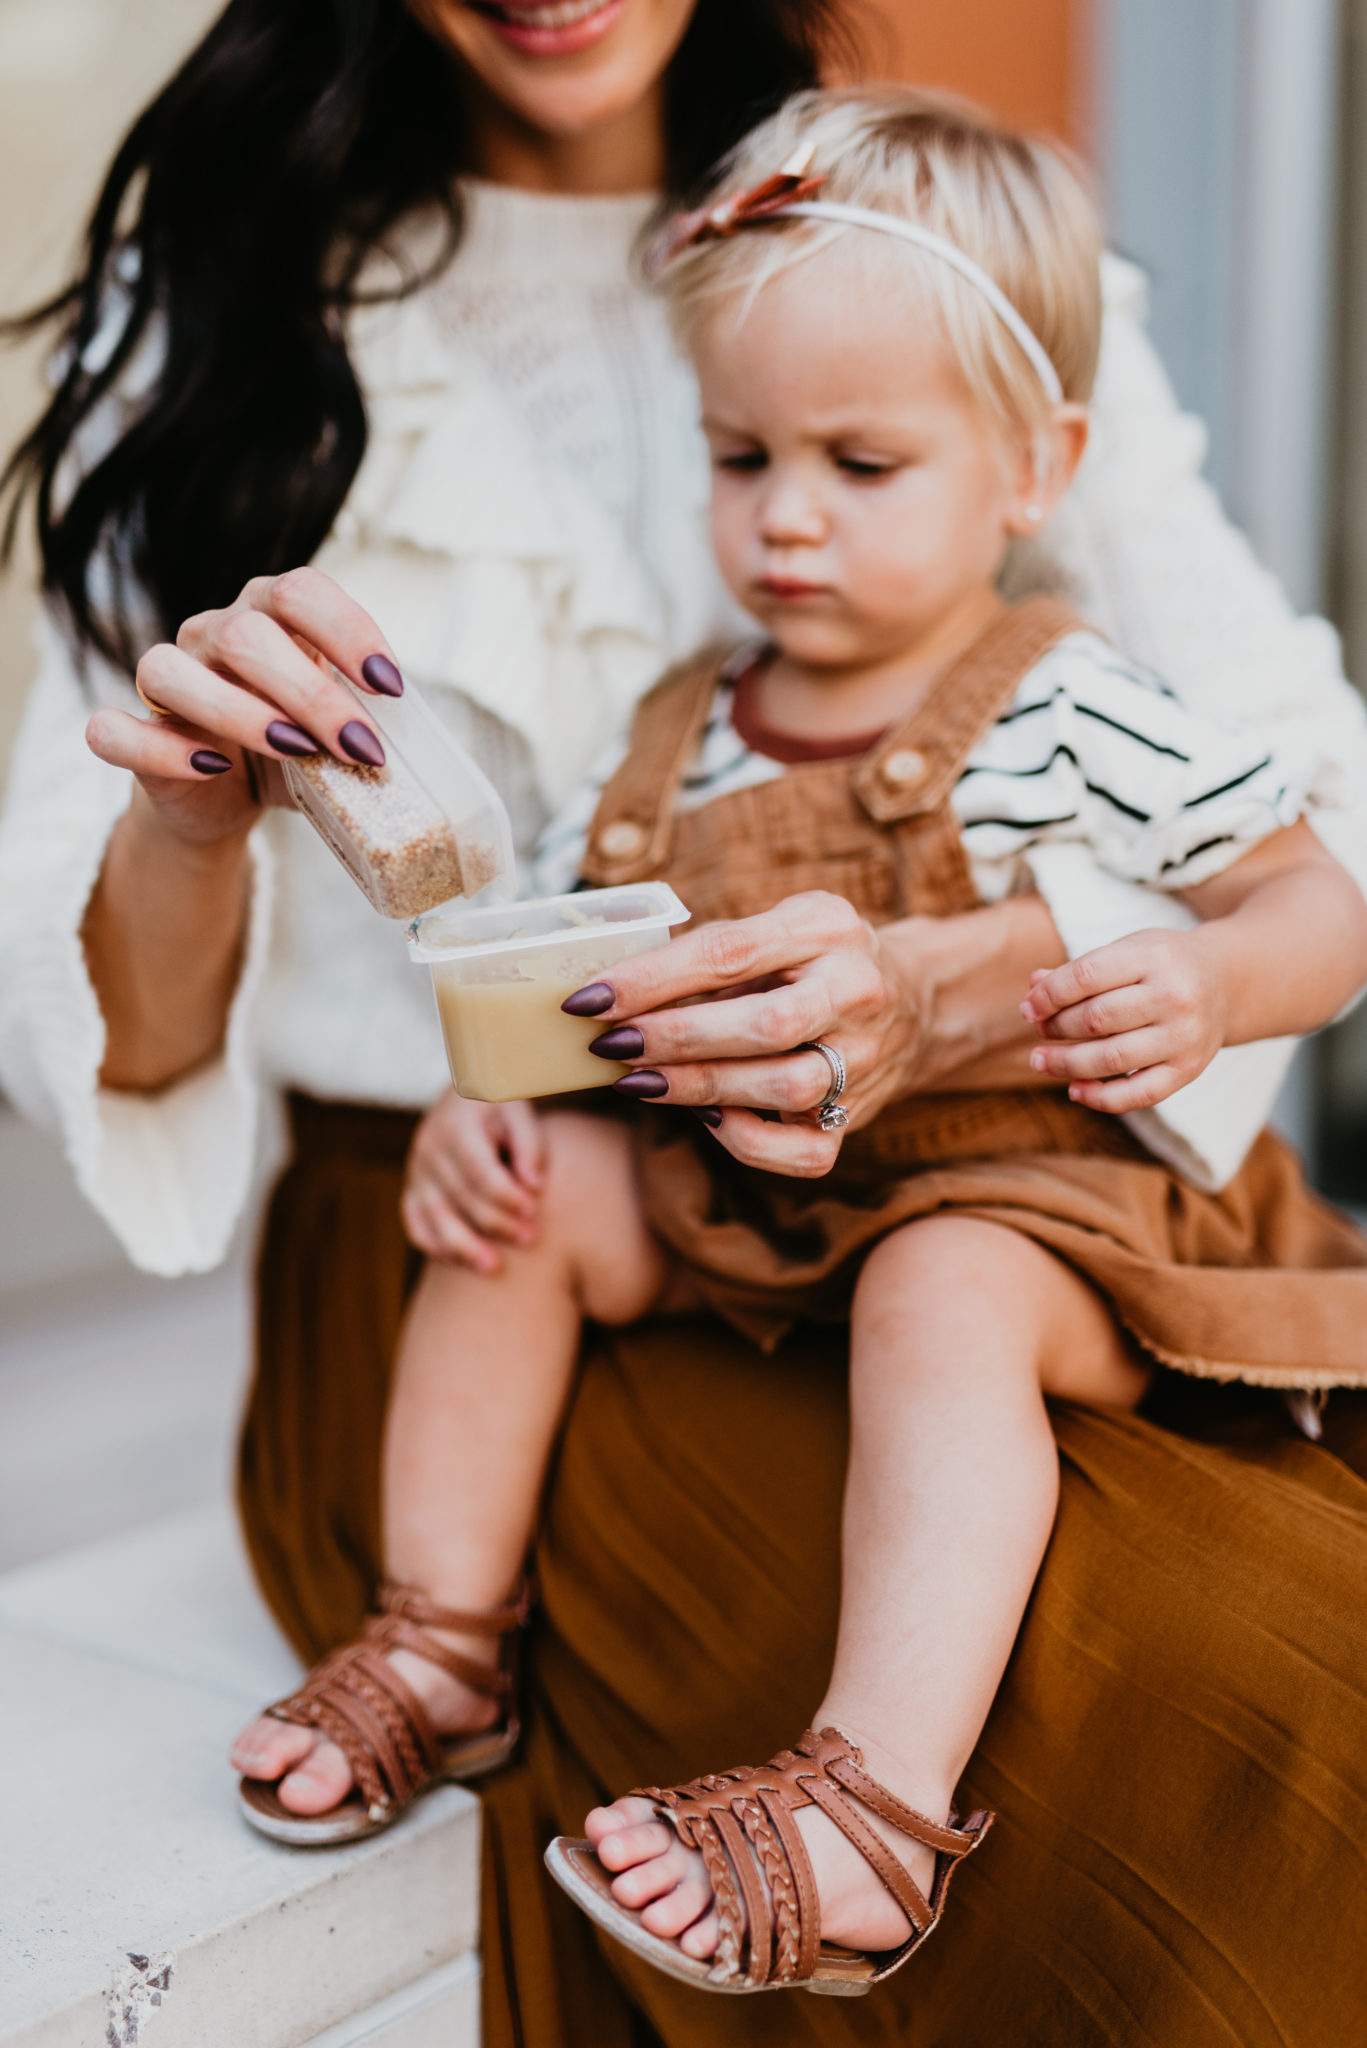 How to create special moments with children, tips featured by top US lifestyle blog, Outfits & Outings